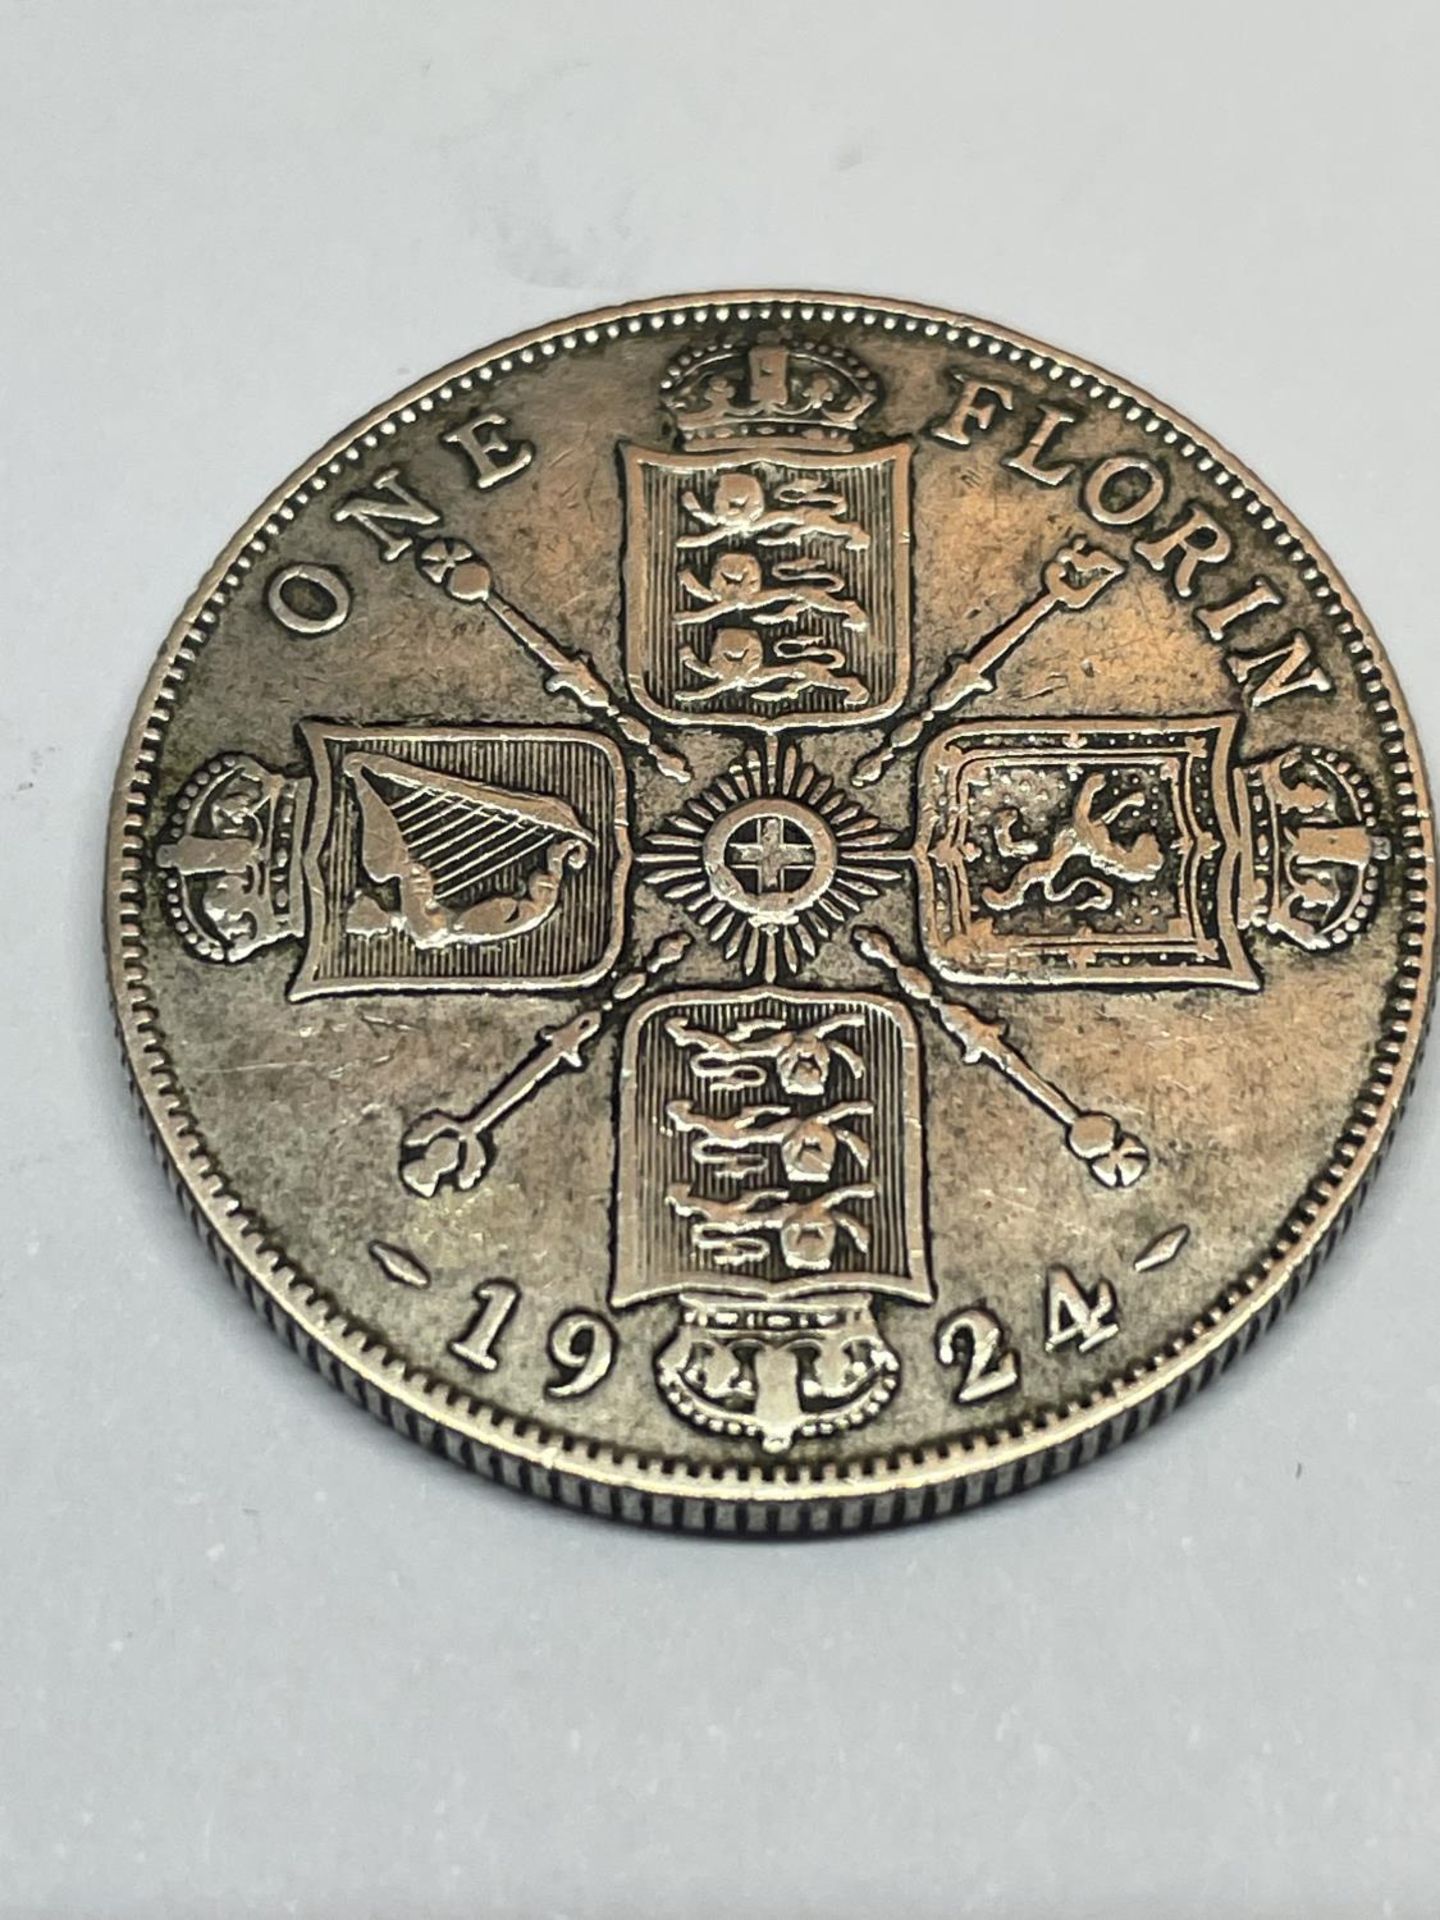 A 1924 GEORGE V SILVER FLORIN